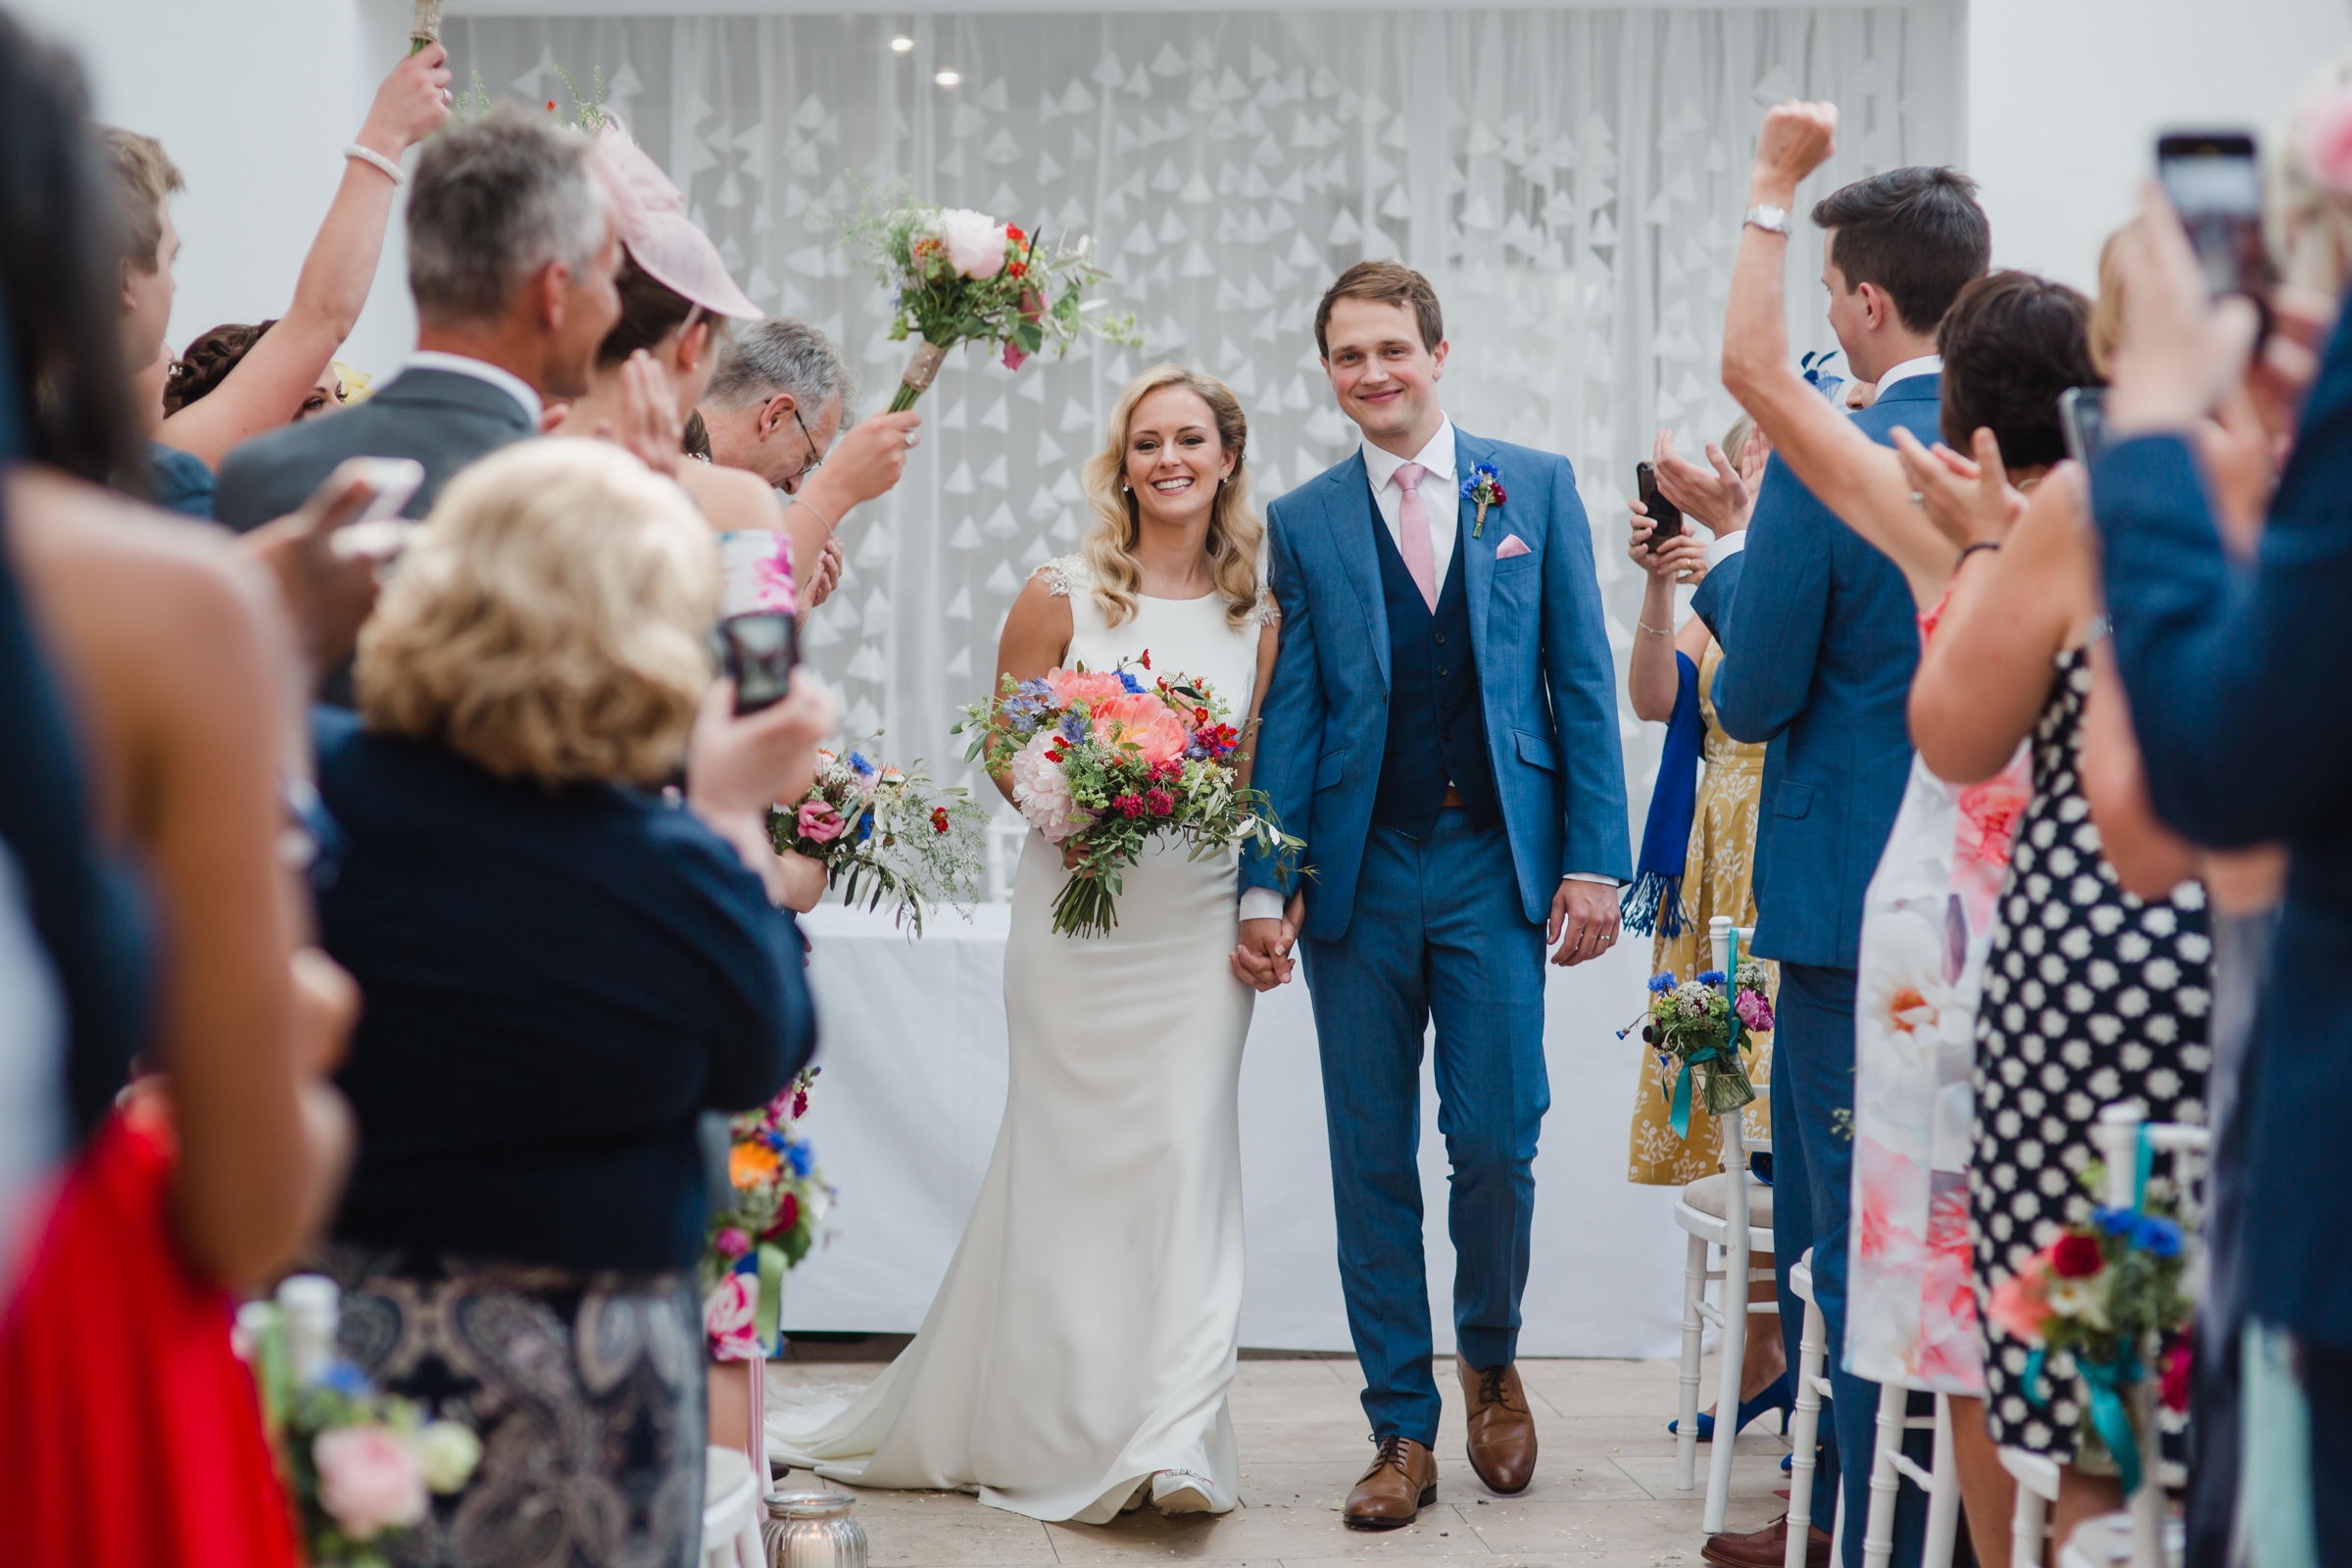 the bride and groom exit down the aisle after their wedding at fazeley studios birmimgham